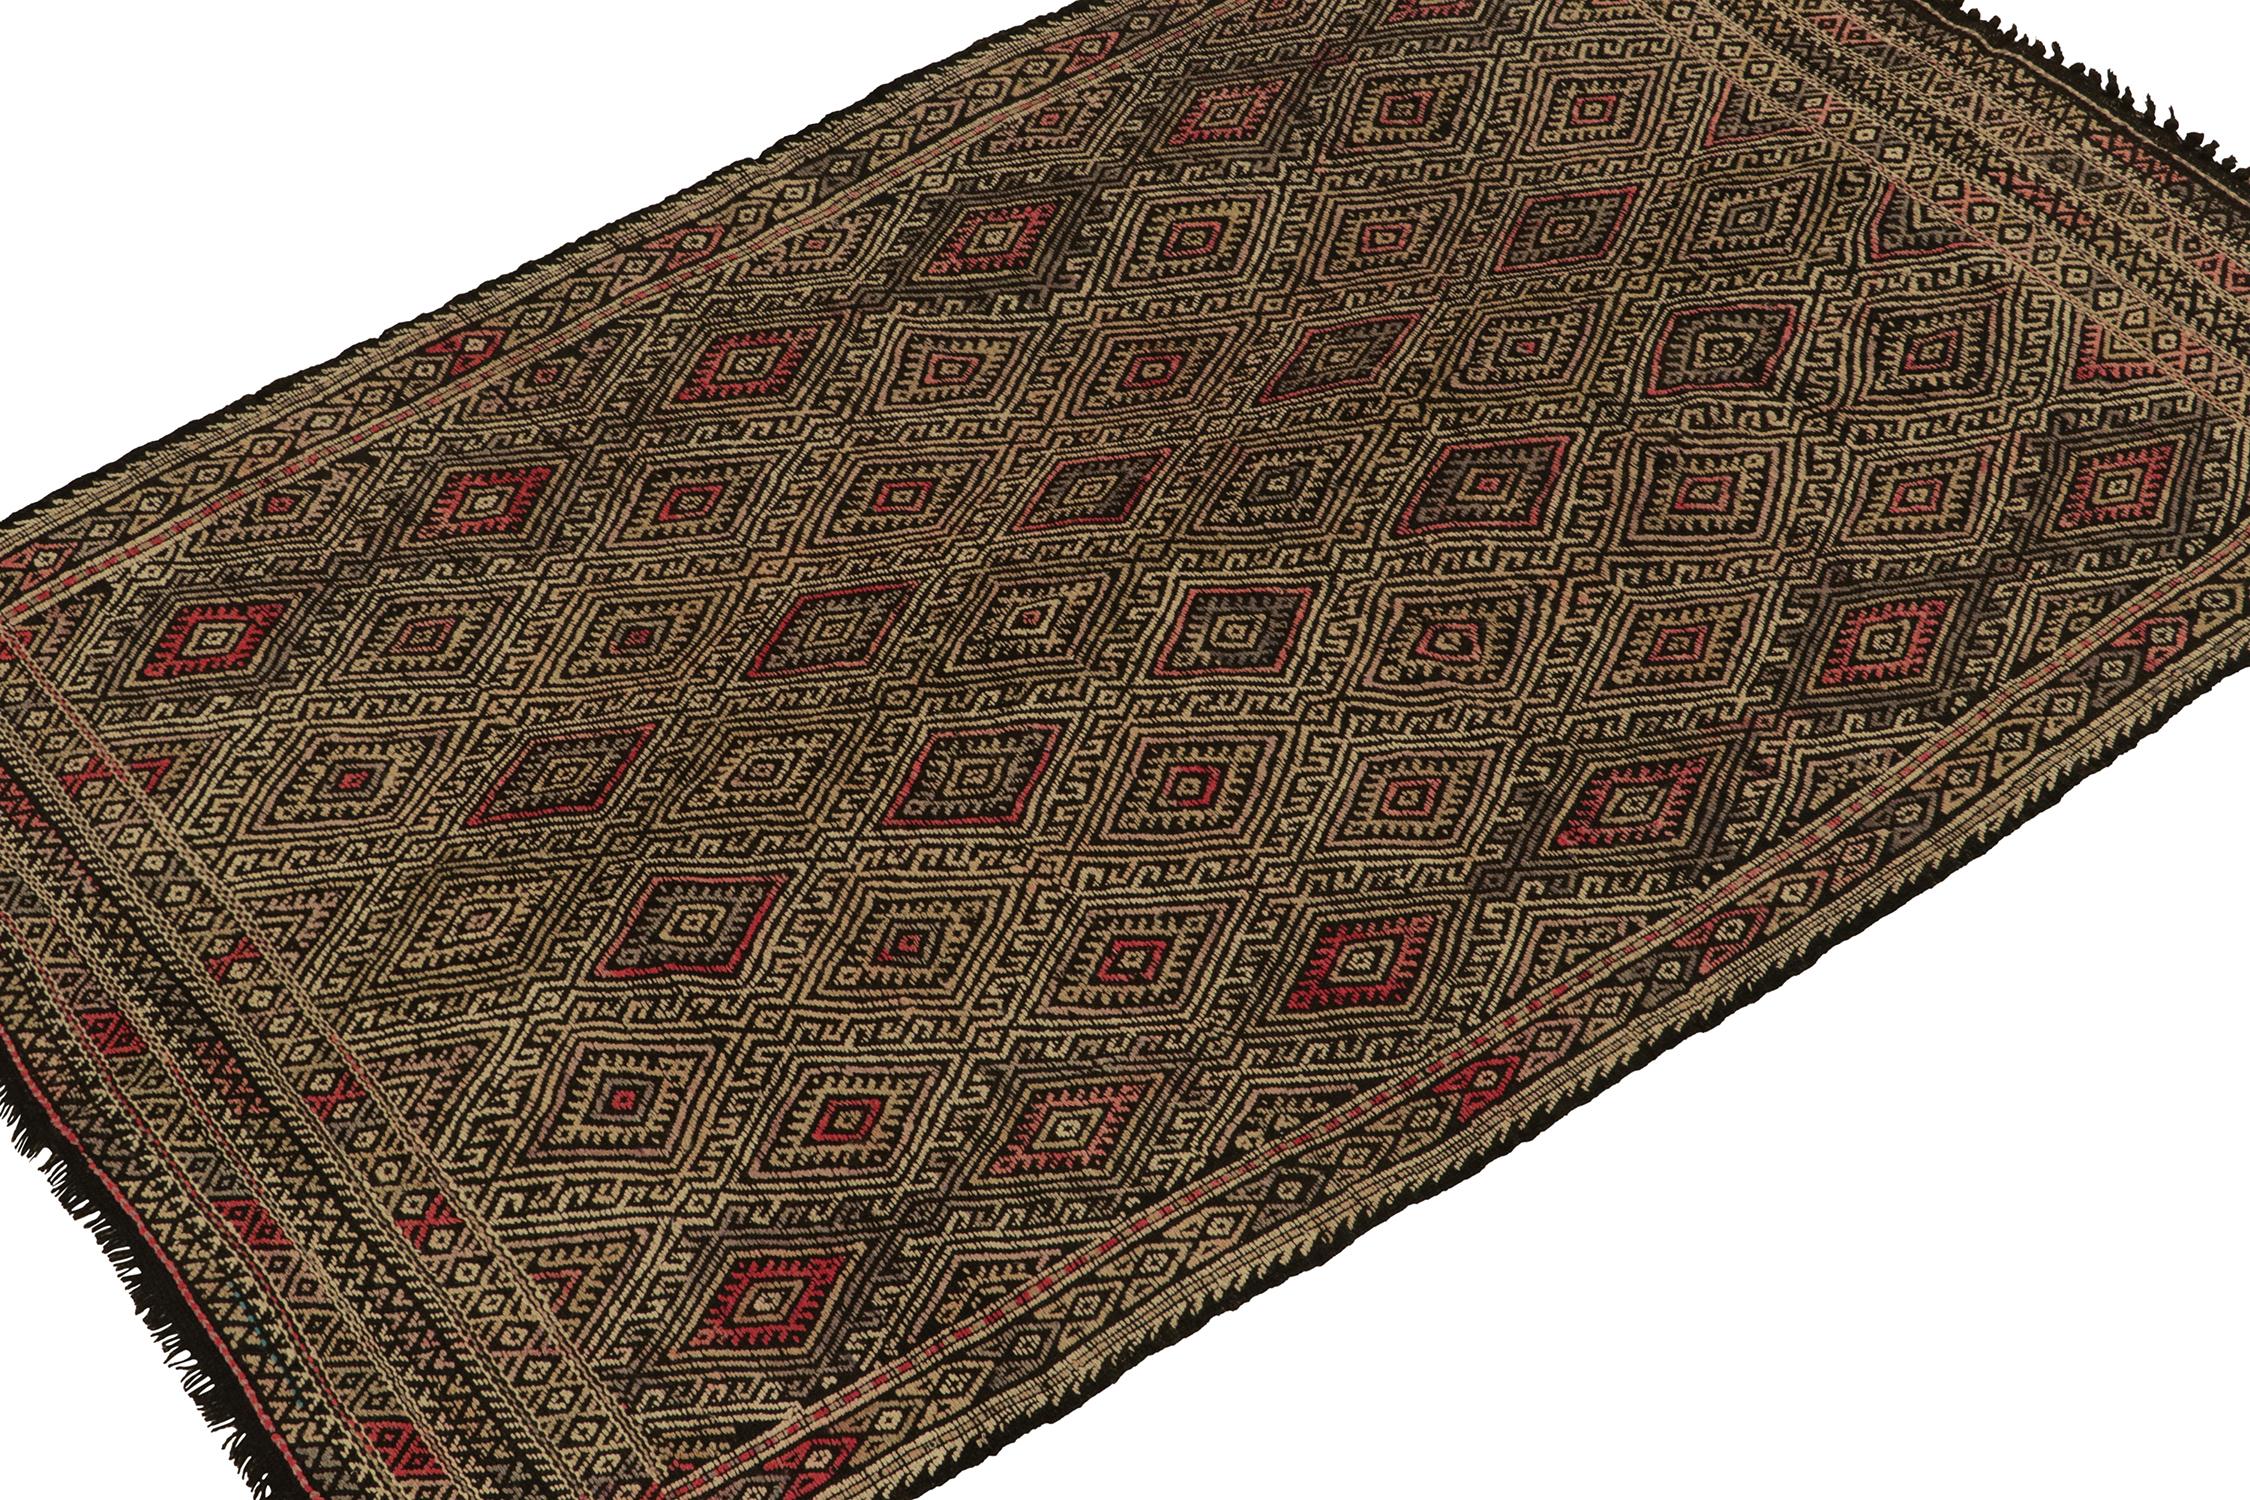 Originating from Turkey circa 1950-1960, a vintage Chaput style kilim rug connoting elaborate tribal sensibilities. Handwoven in wool, the piece exhibits an unusual play of vibrant red and beige-brown embroidery atop a black background seldom seen